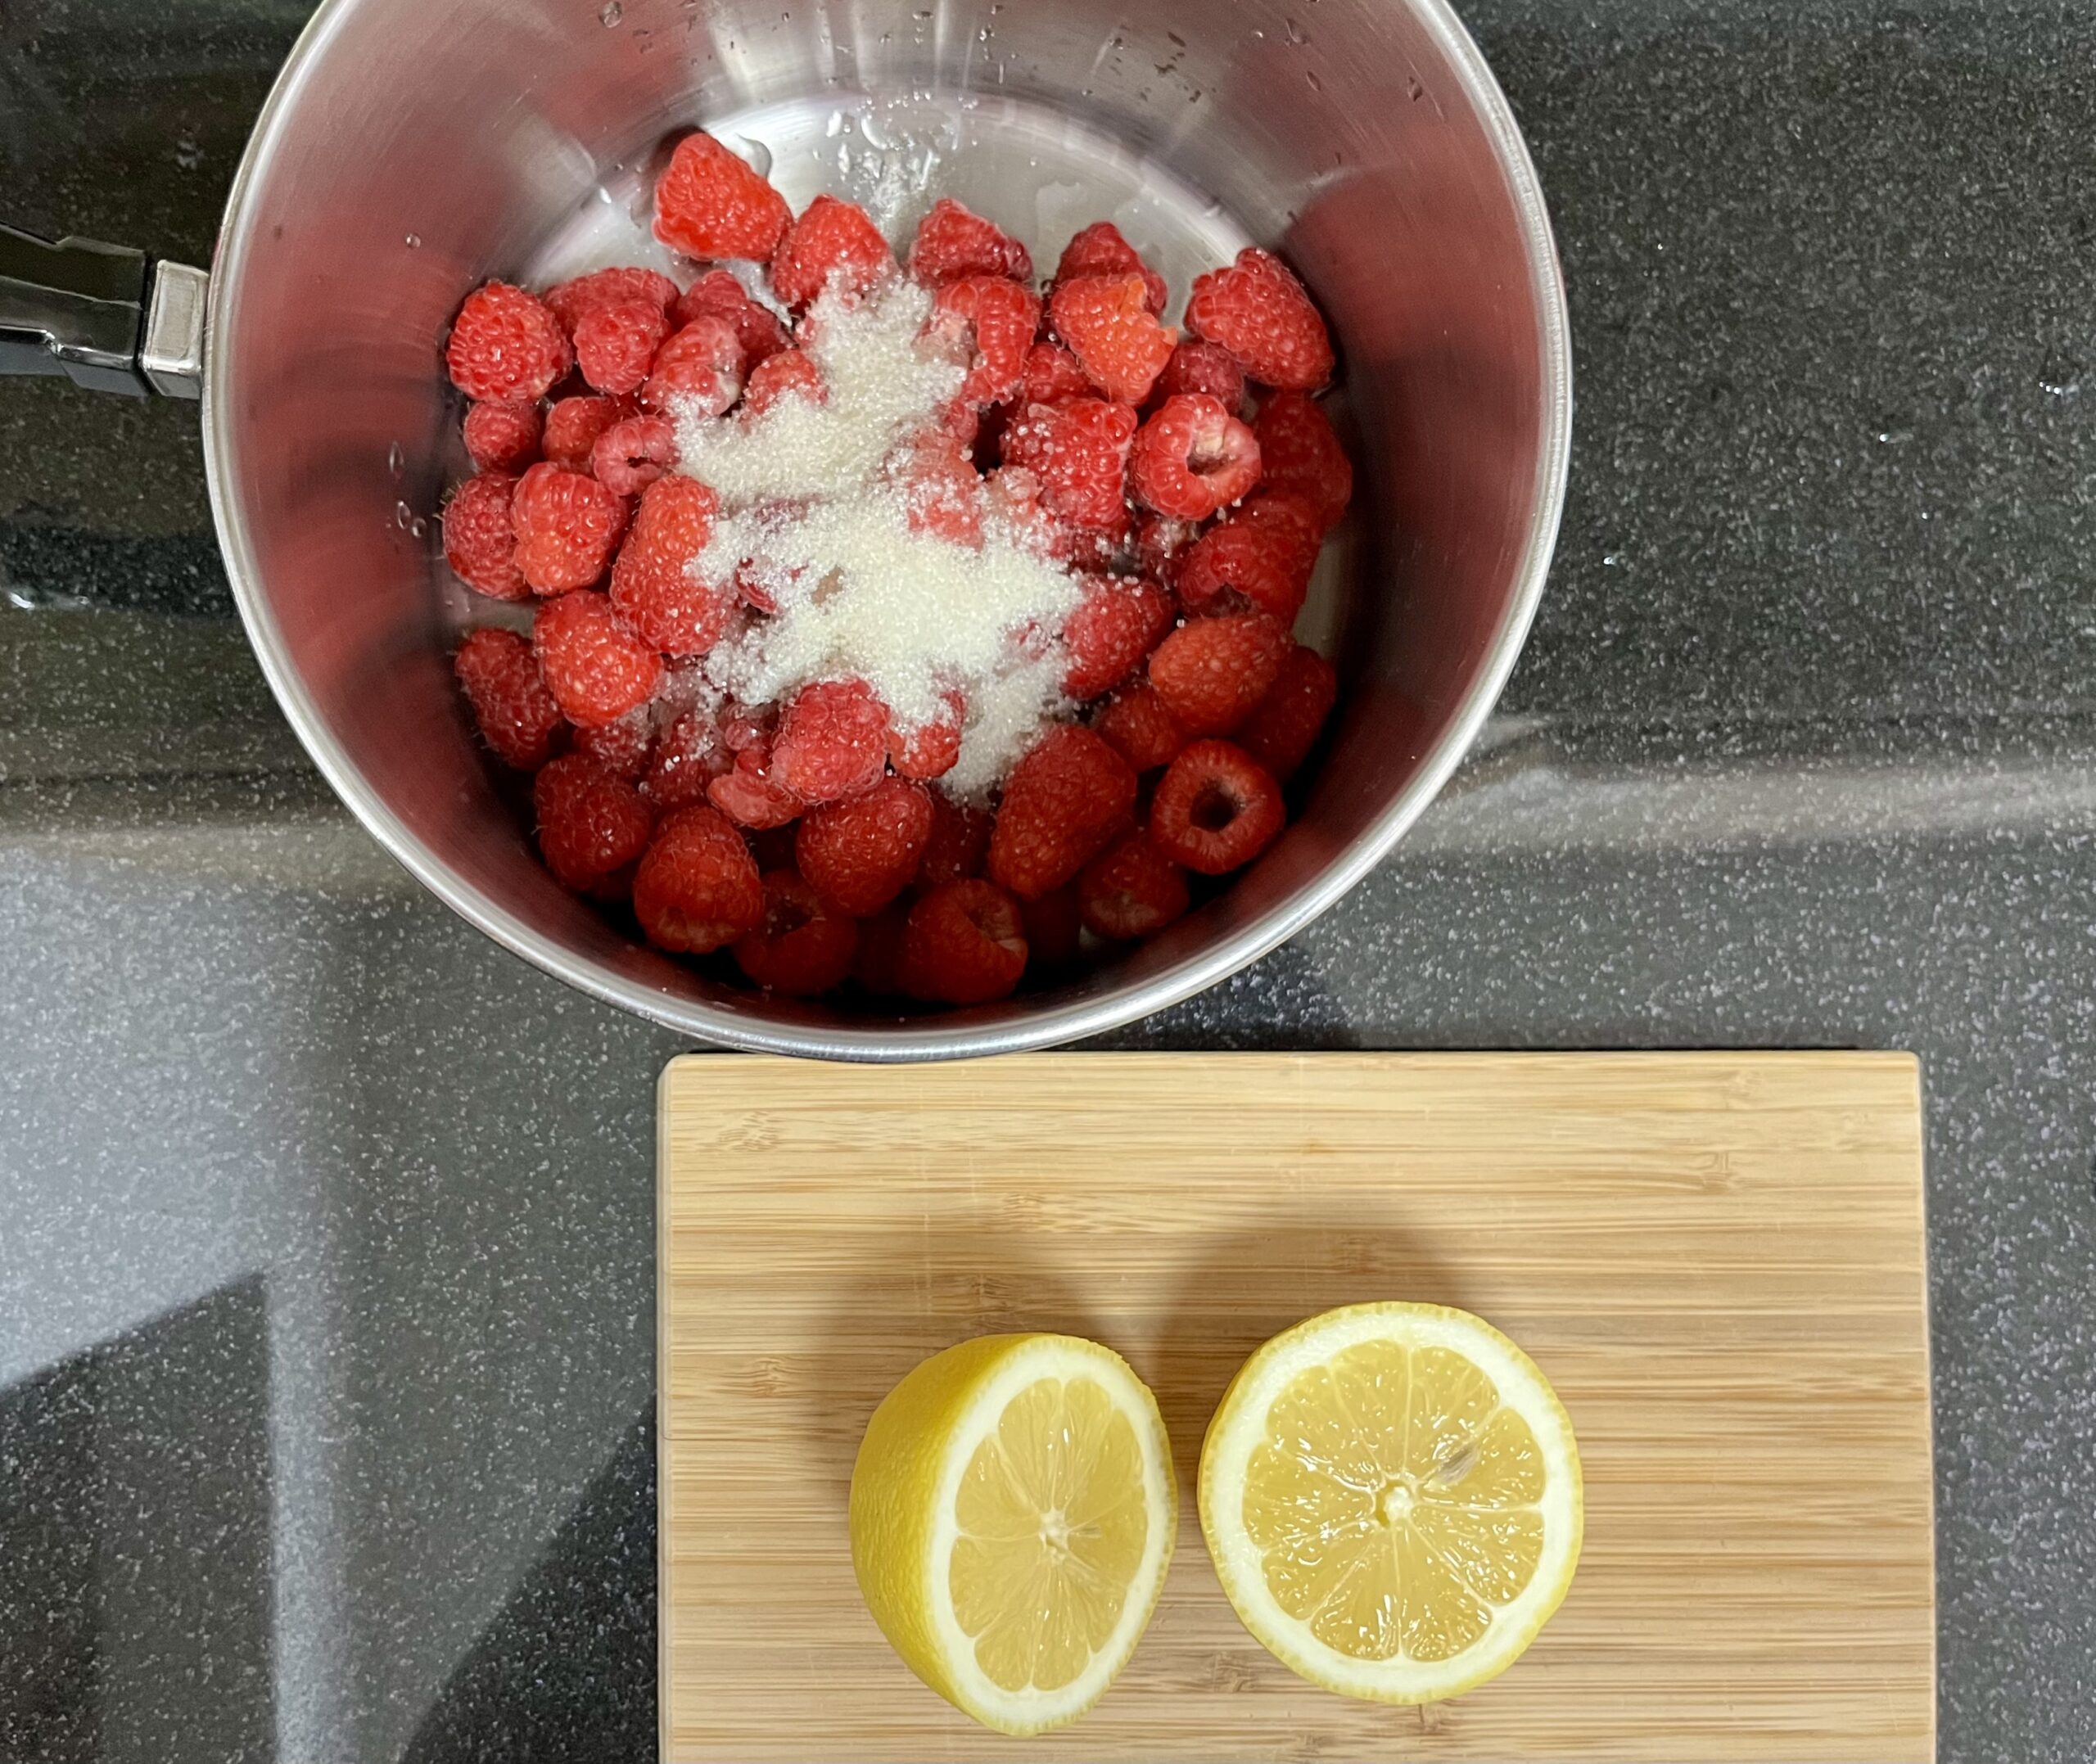 A metal pot with raspberries and sugar and a brown cutting board with a lemon cut in half sit on a black countertop.